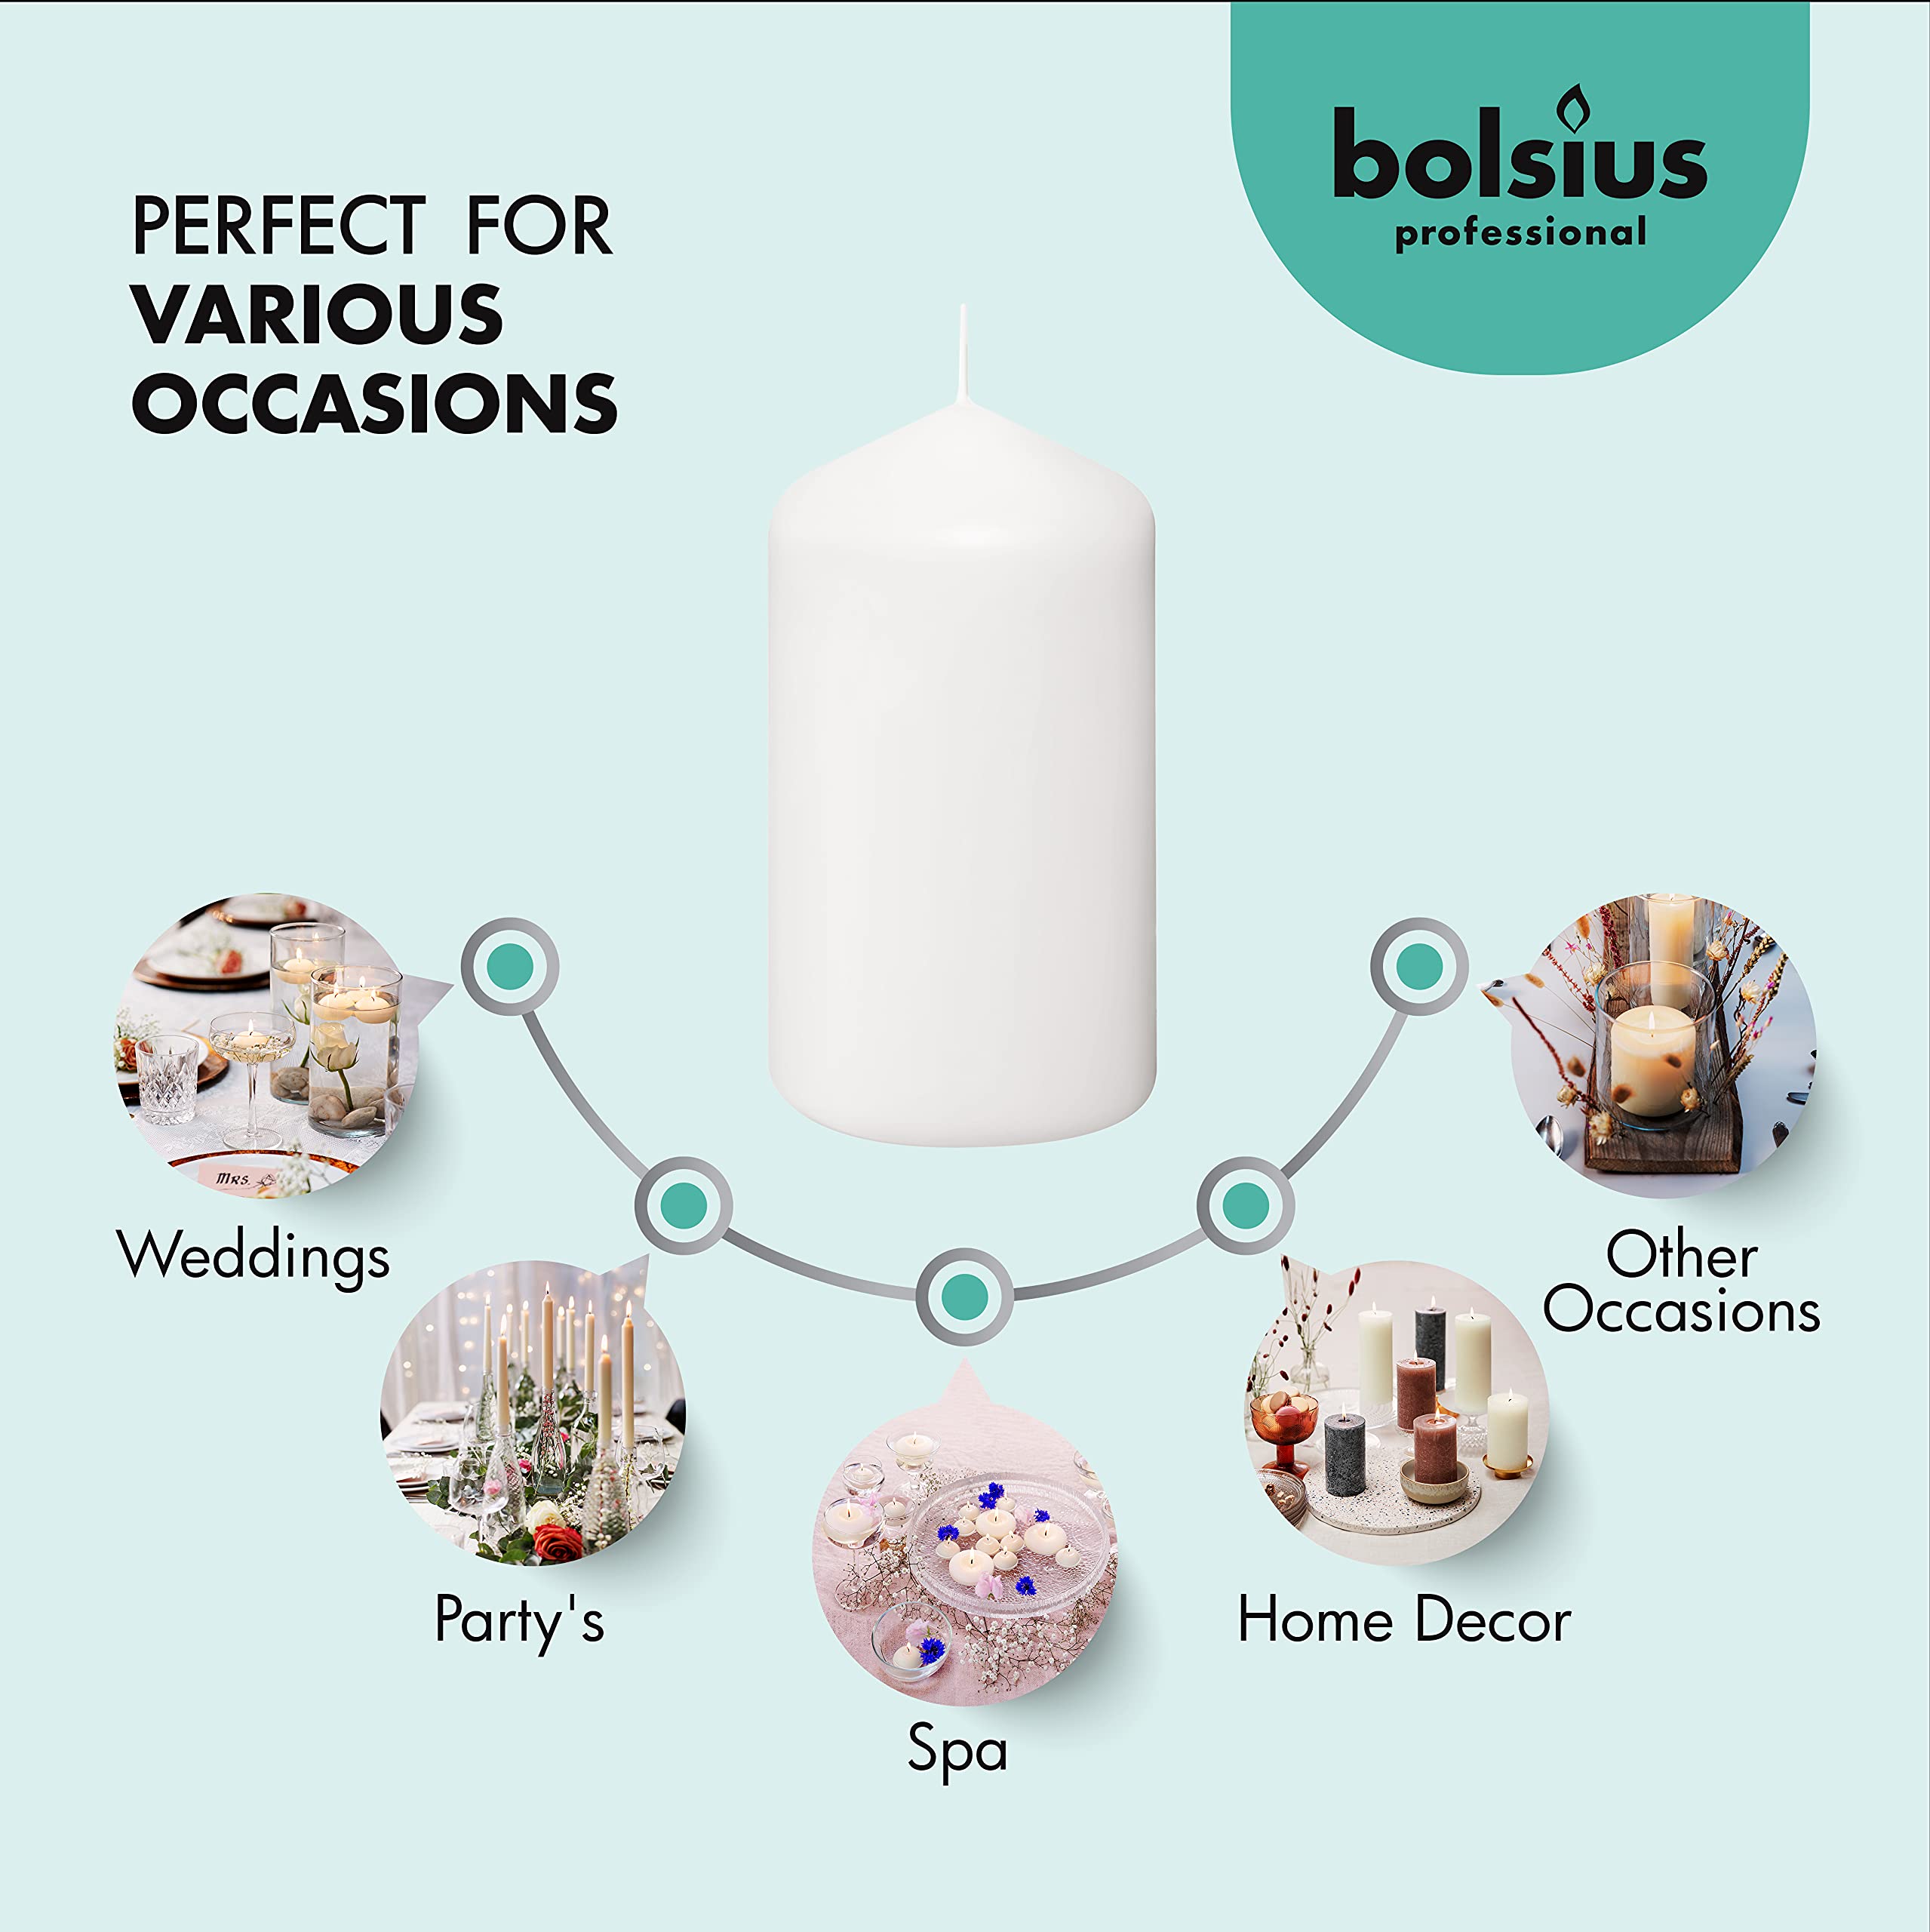 BOLSIUS 12 White Pillar Candles - 2.7 x 5.1 Inches Unscented Candle Set - 43 Hours - Dripless Clean Burning Smokeless Dinner Candle - Perfect for Wedding Candles, Parties and Special Occasions  - Acceptable